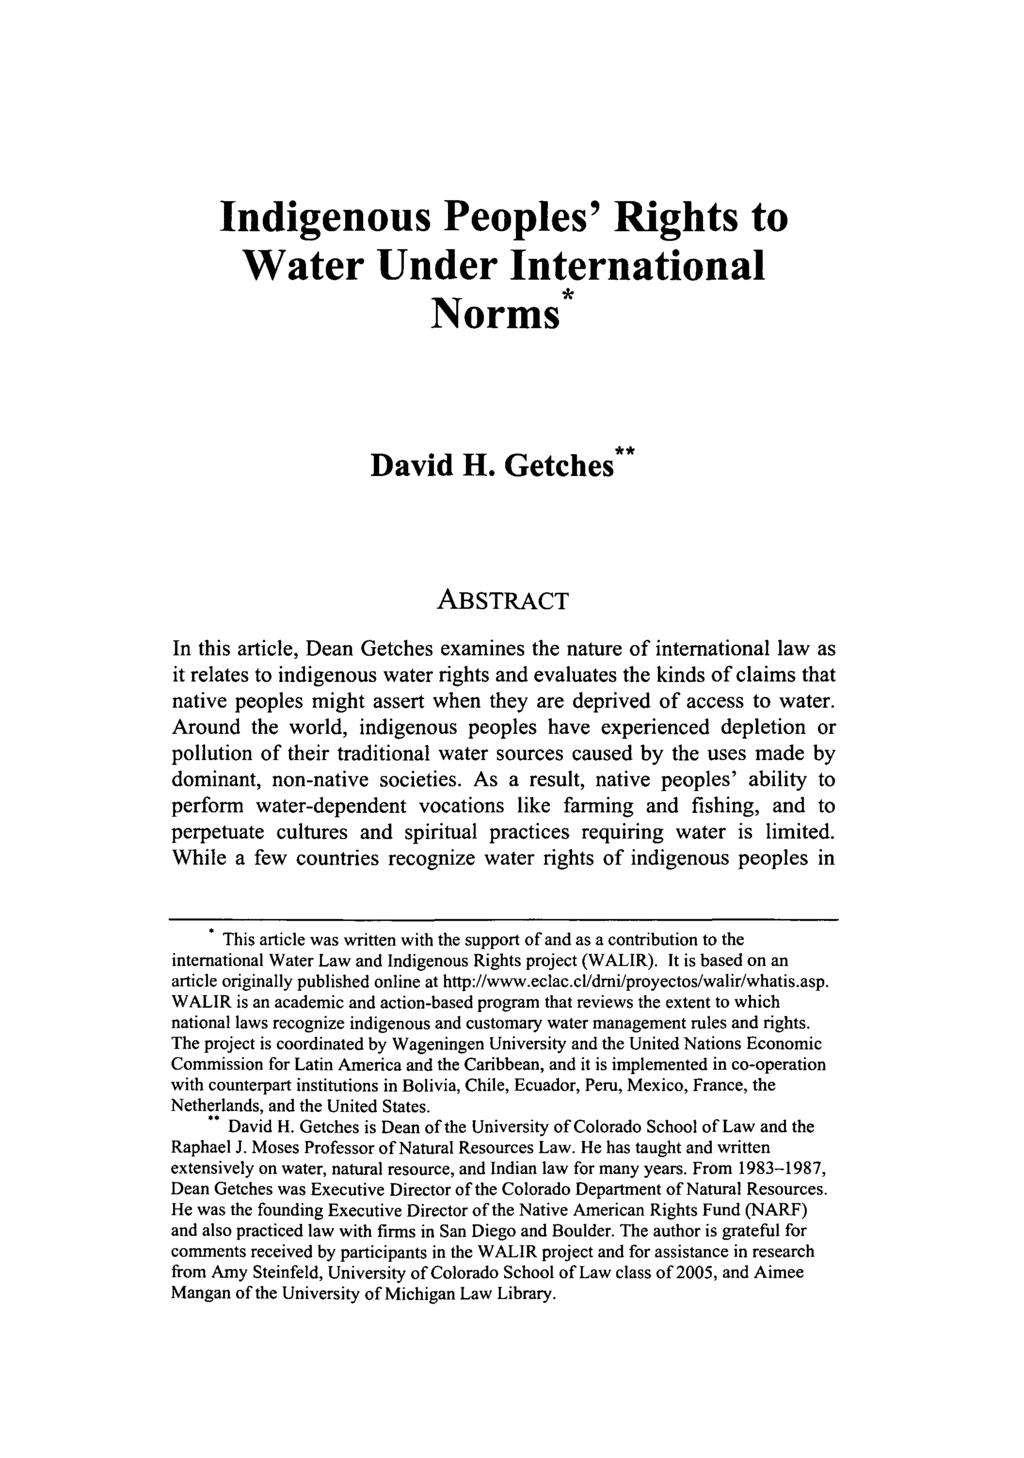 Indigenous Peoples' Rights to Water Under International Norms * David H.